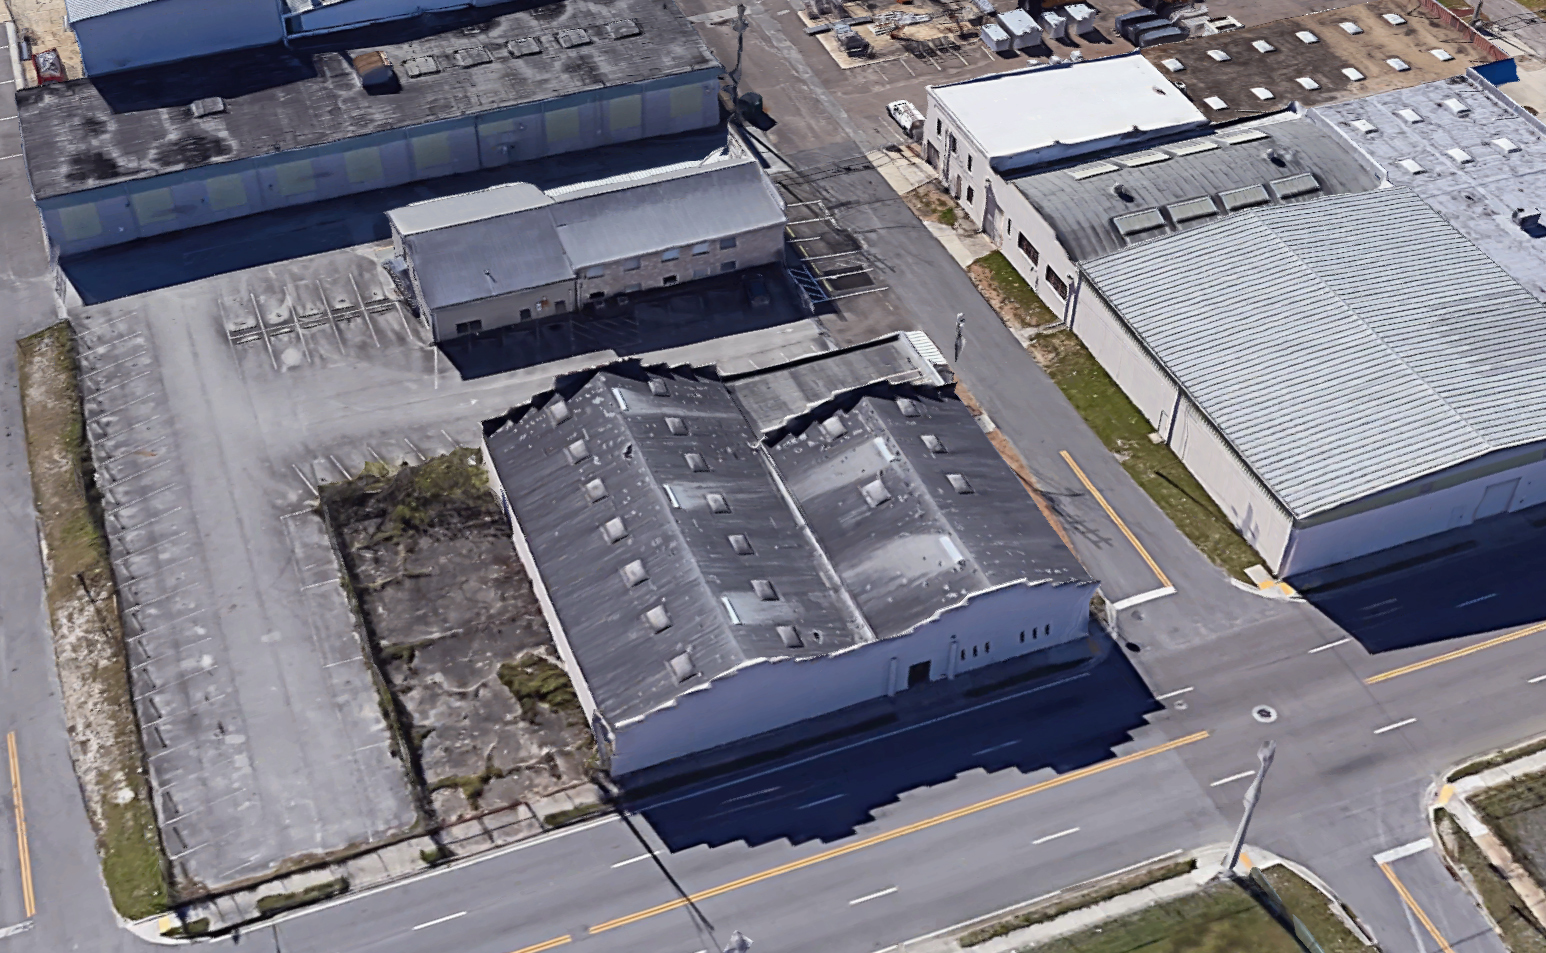 Phoenix Products LLC plans to build an administration building at 1544 E. Eighth St. (Google)